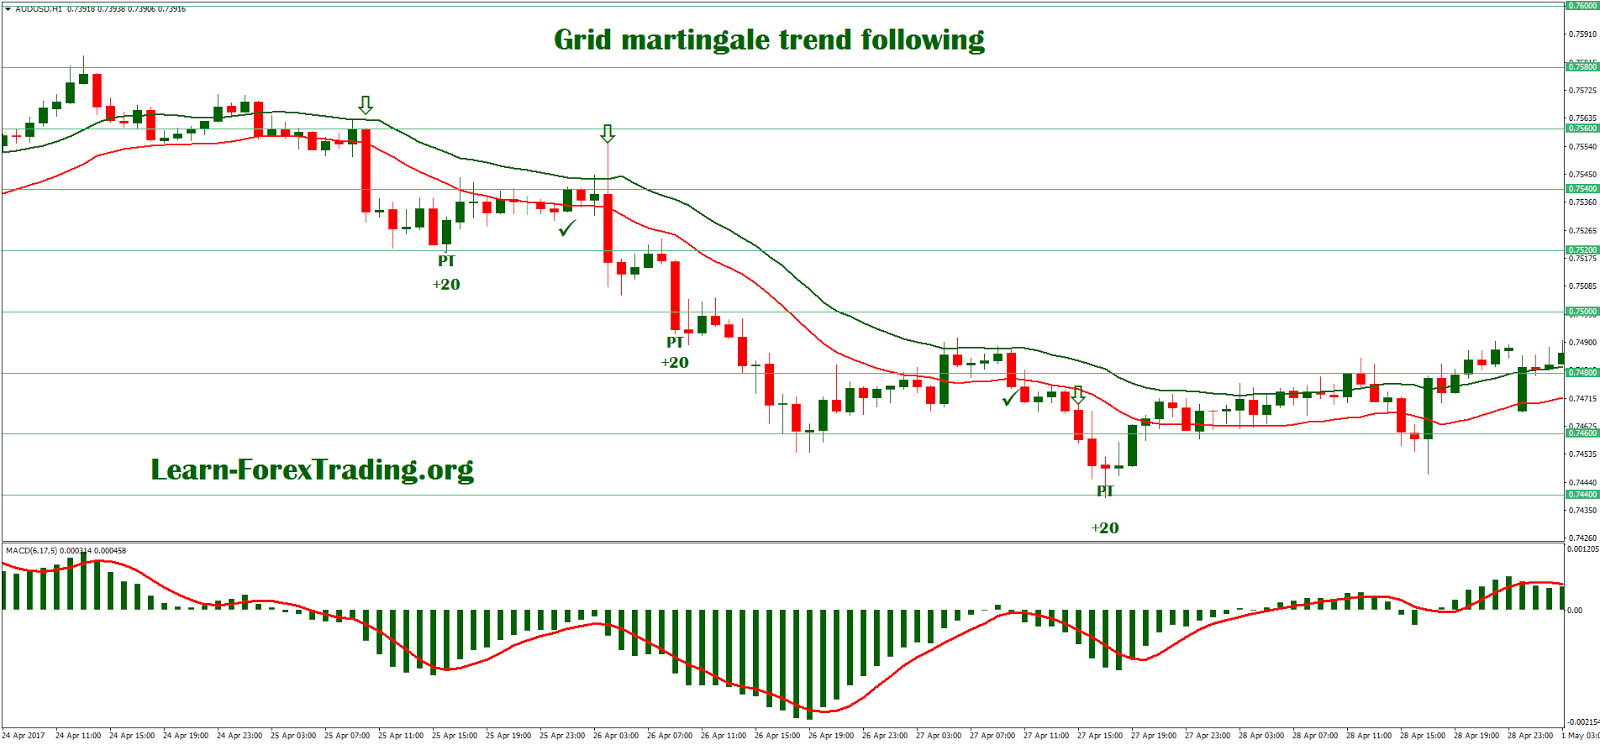 Grid martingale trend following - Learn Forex Trading